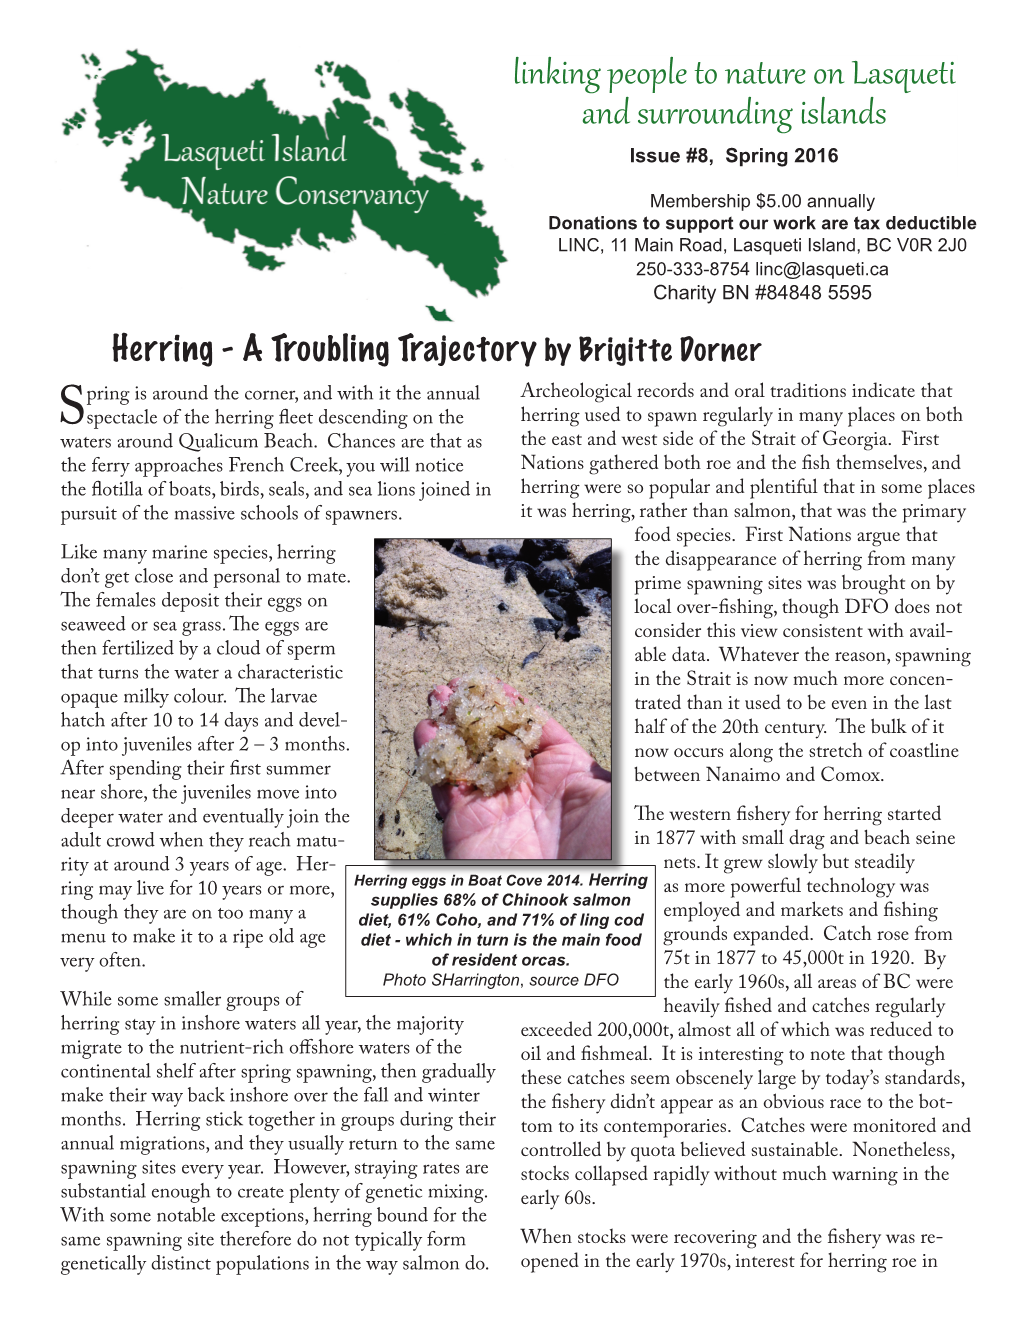 Linking People to Nature on Lasqueti and Surrounding Islands Issue #8, Spring 2016